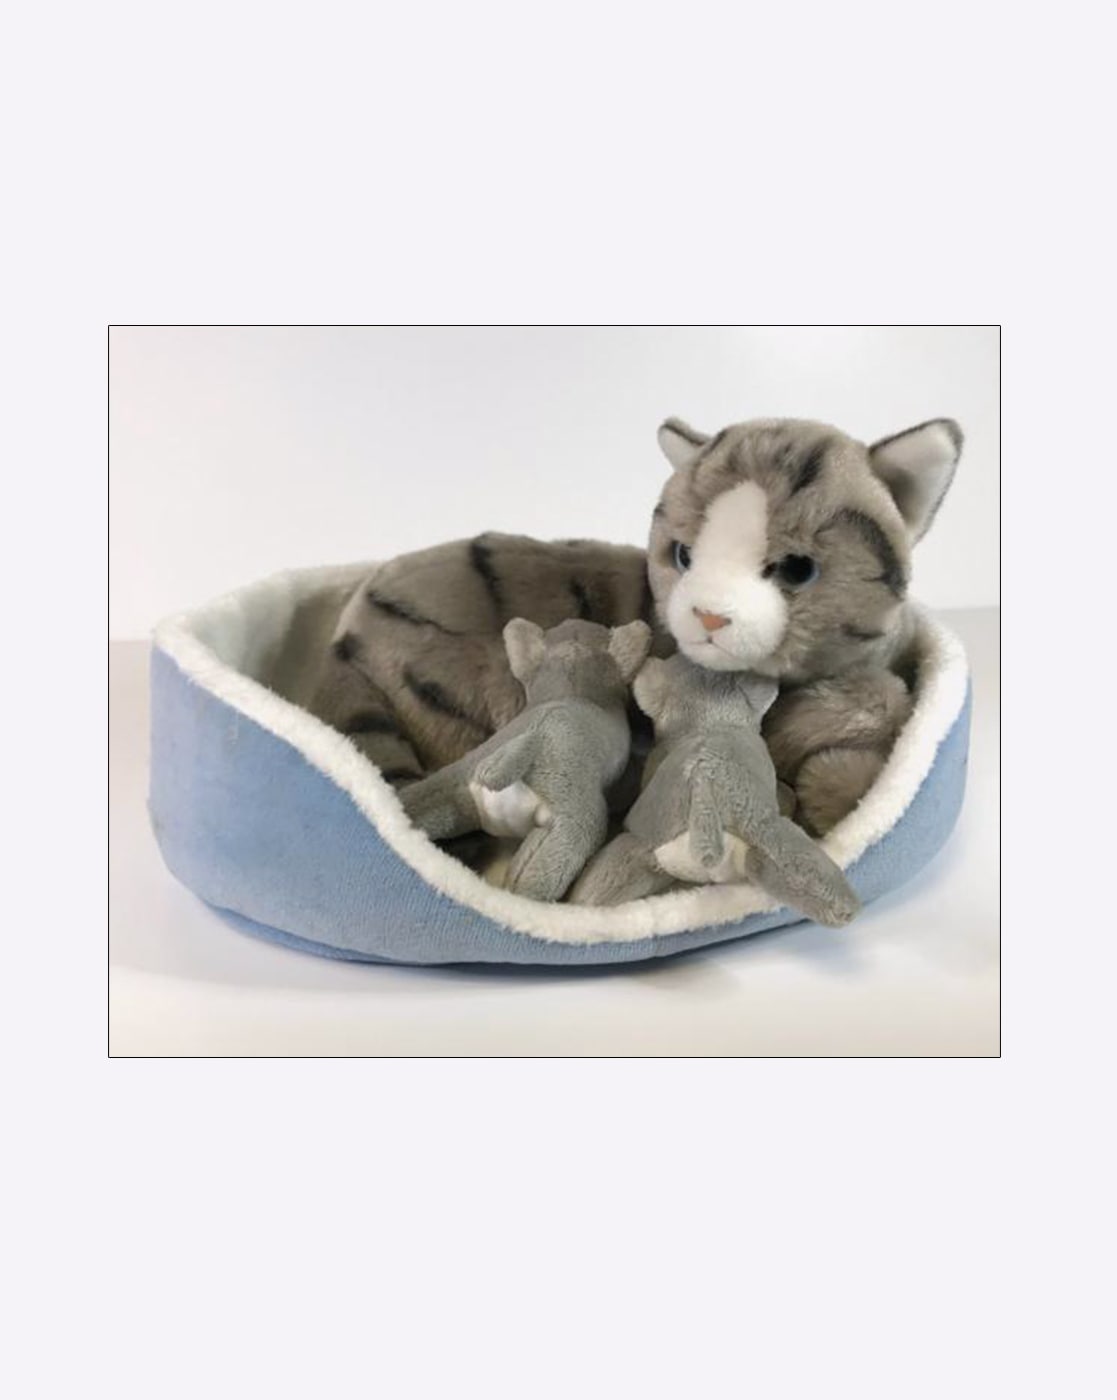 cat with kittens toy